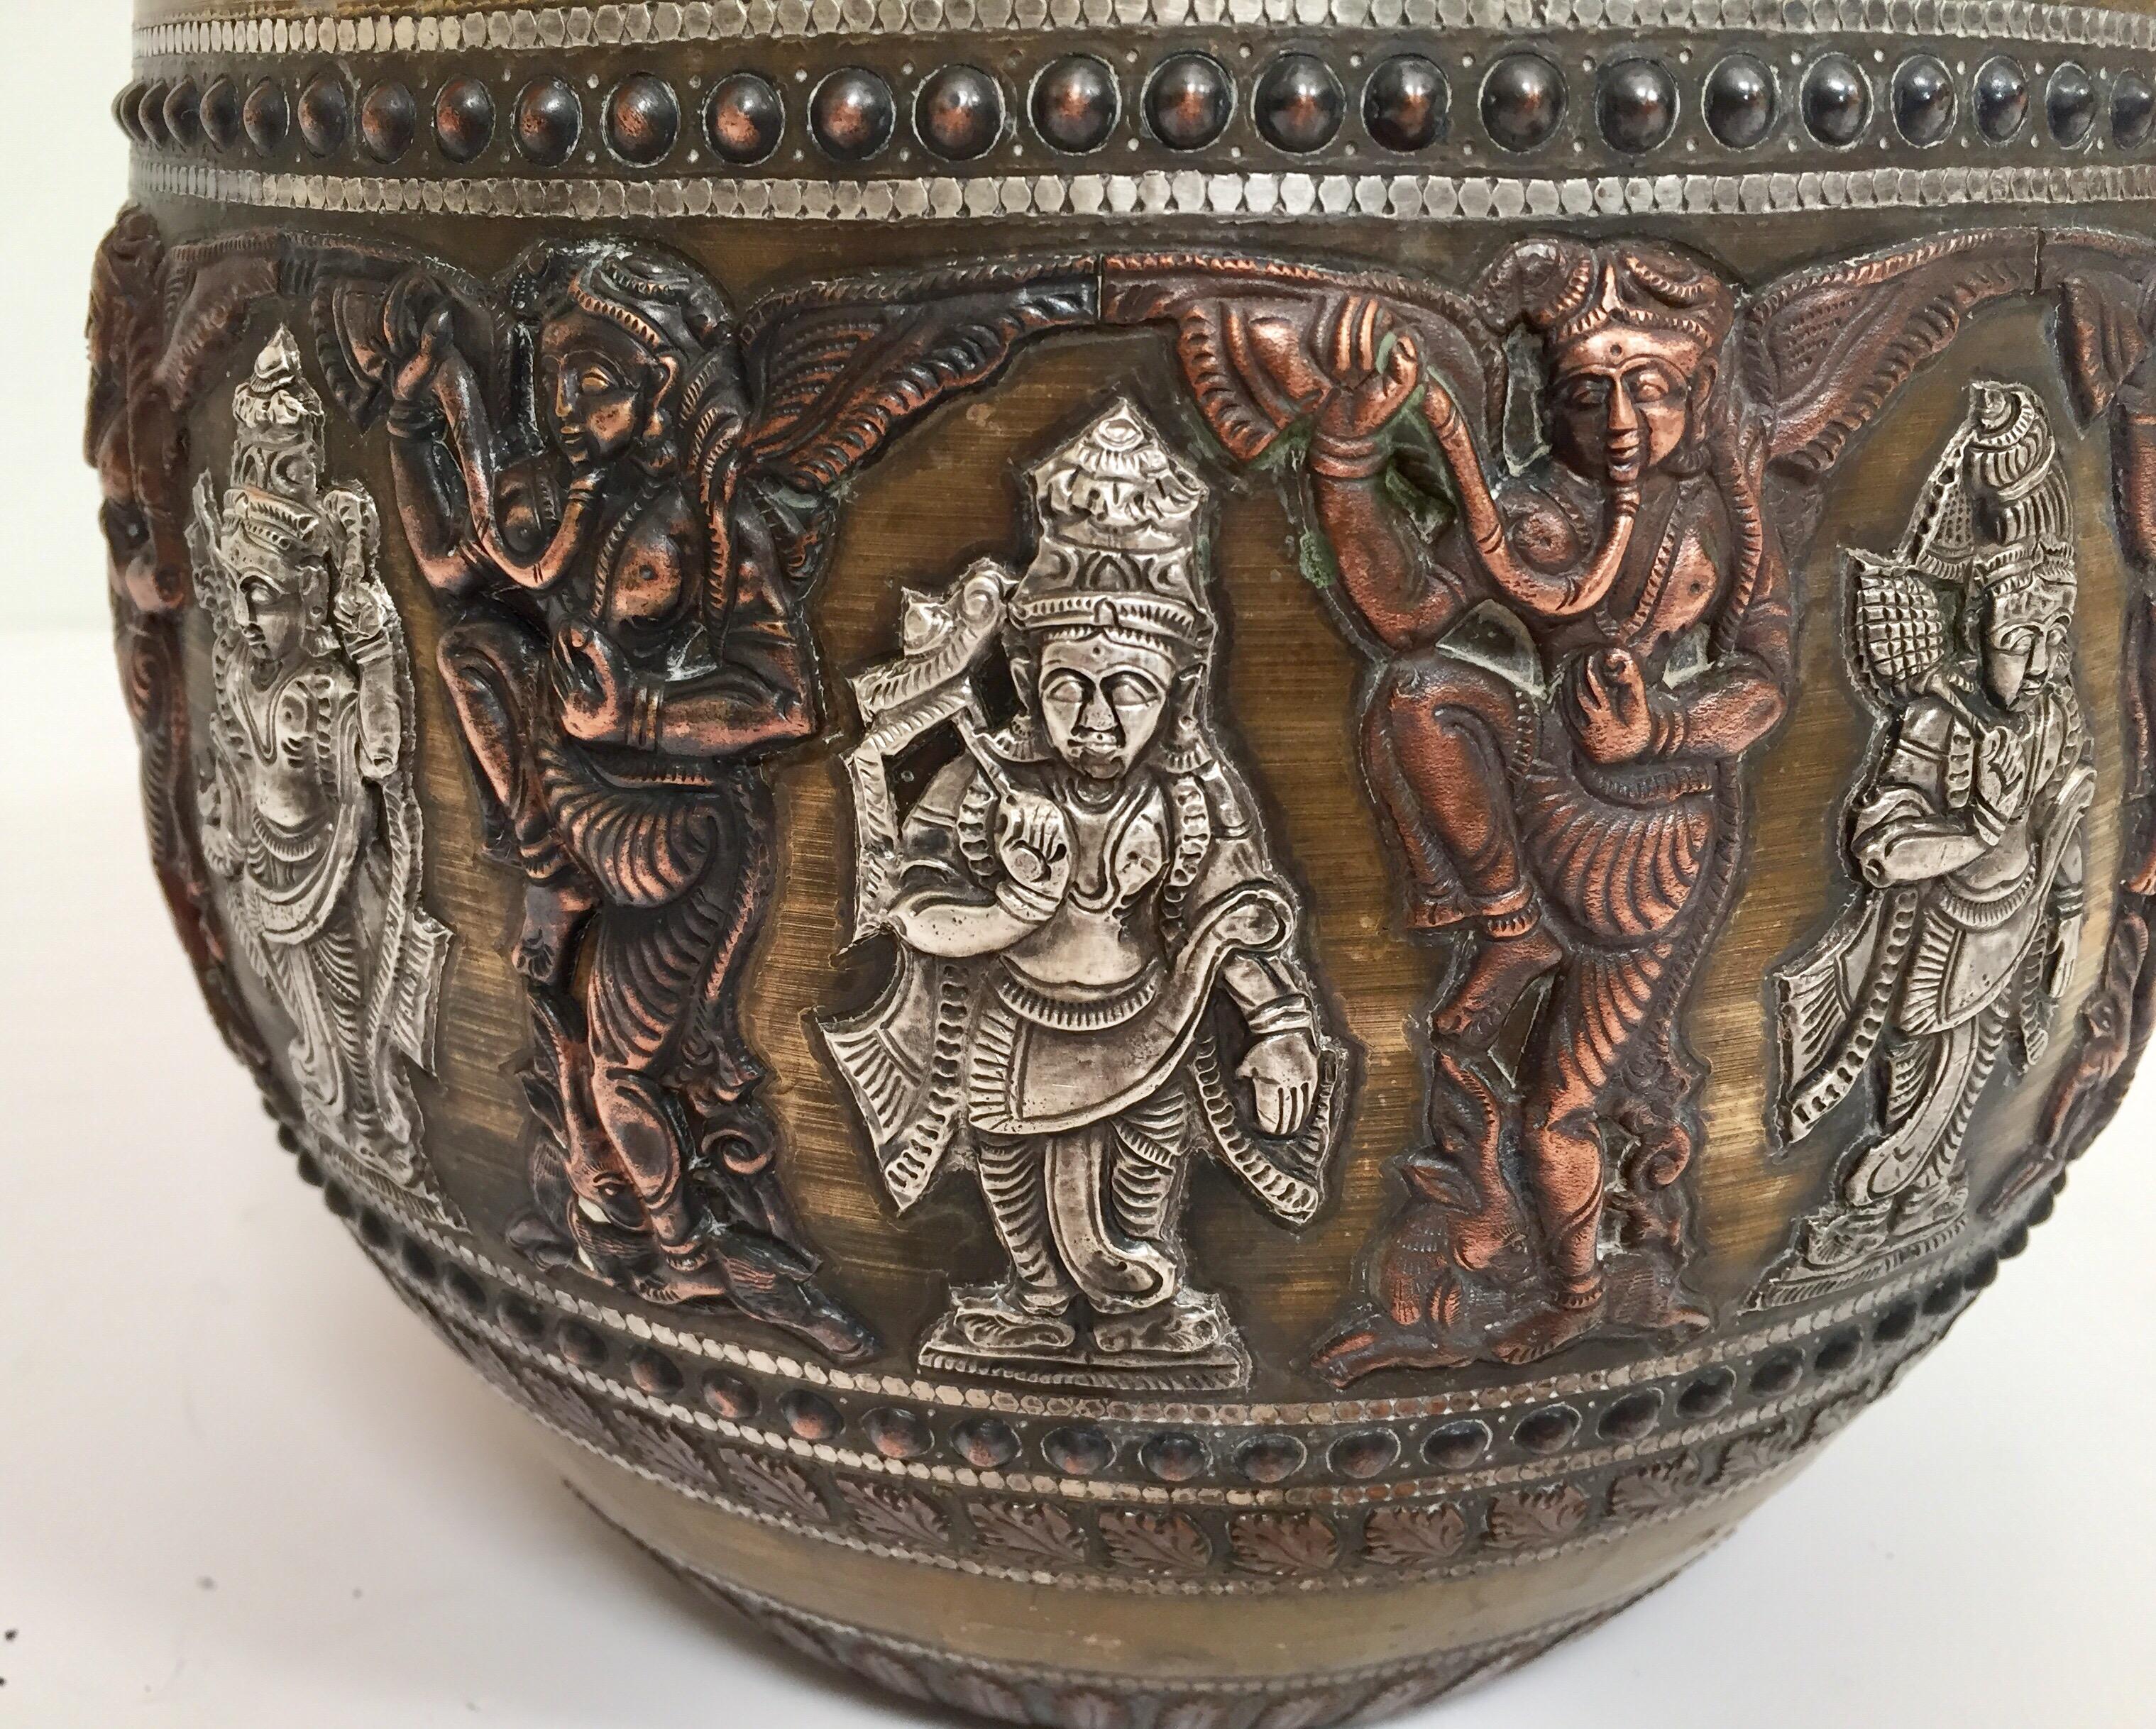 Large Burmes Brass, Copper, Silver Inlaid Ceremonial Bowl with Avatars of Vishnu For Sale 8